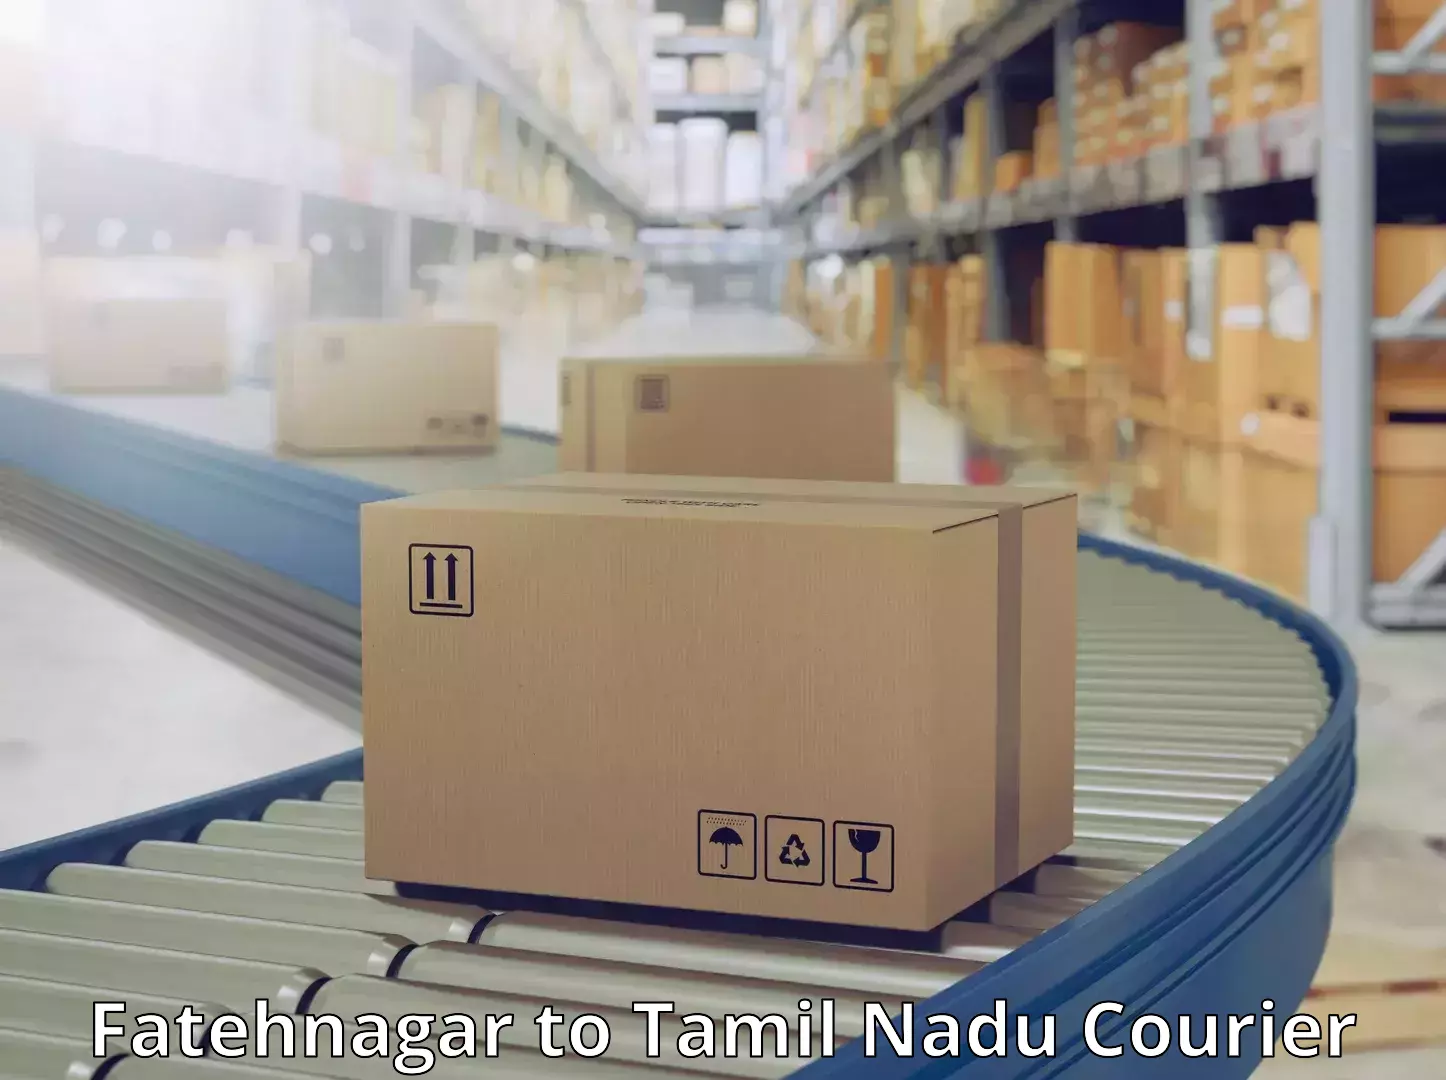 Same-day delivery solutions Fatehnagar to Ennore Port Chennai